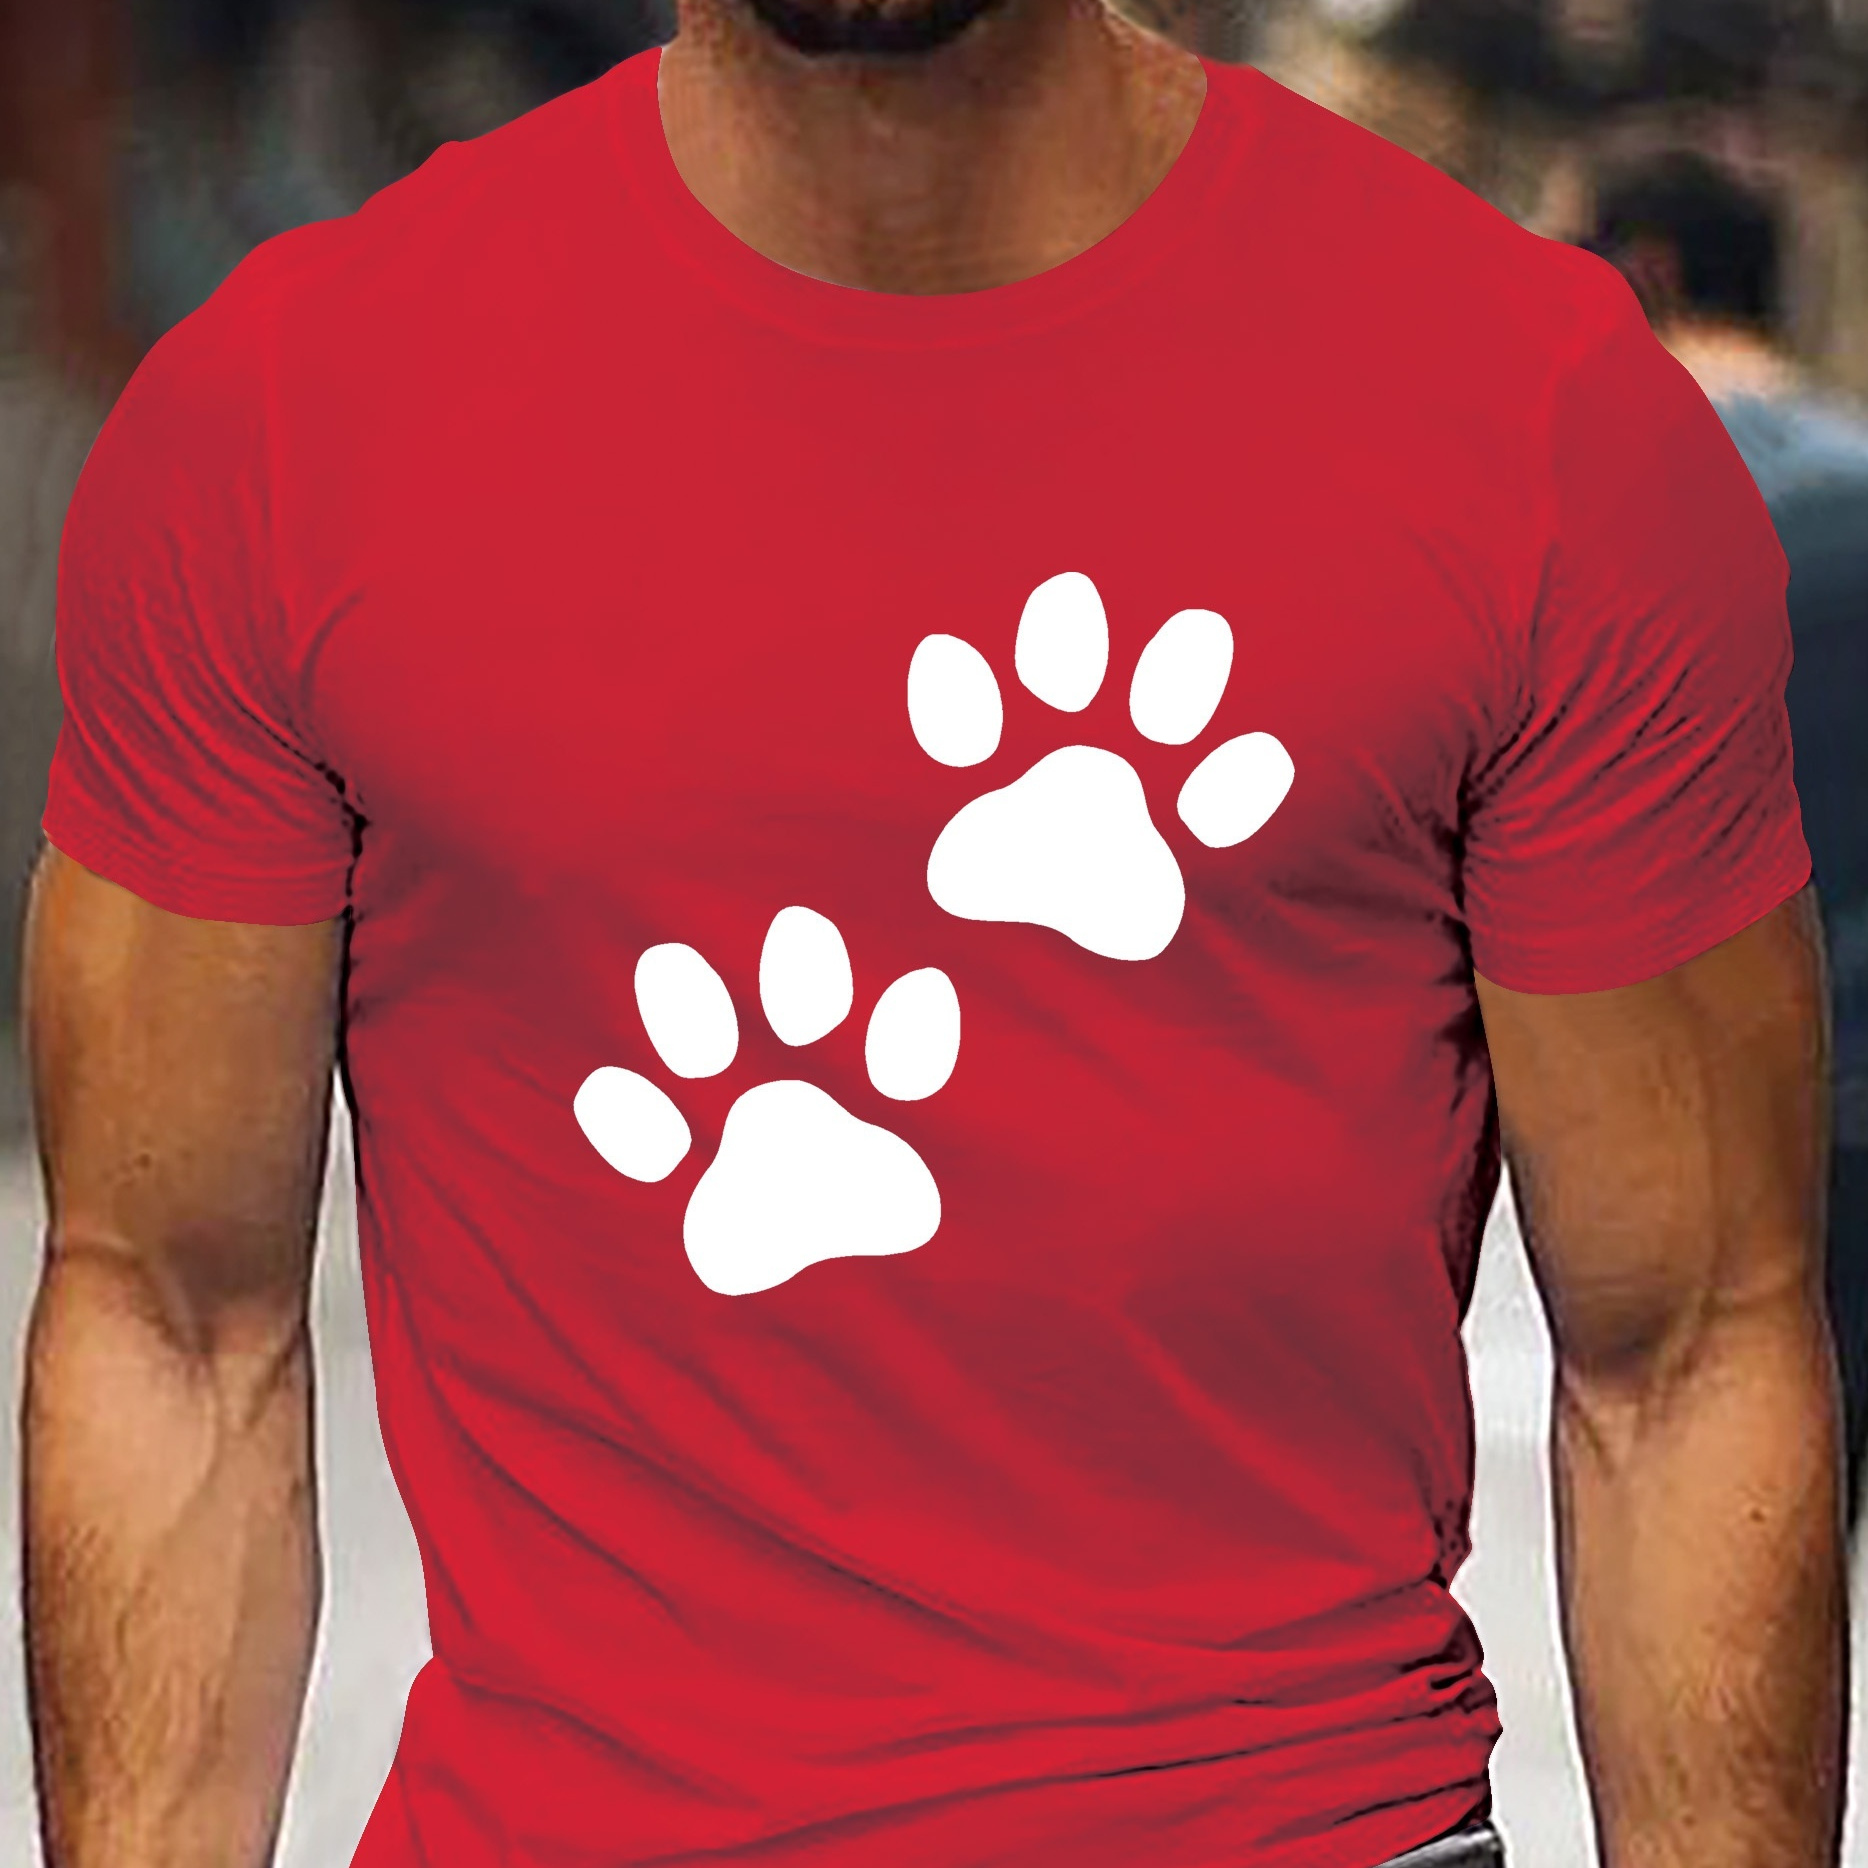 

Dog Paws Graphic Men's Short Sleeve T-shirt, Comfy Stretchy Trendy Tees For Summer, Casual Daily Style Fashion Clothing